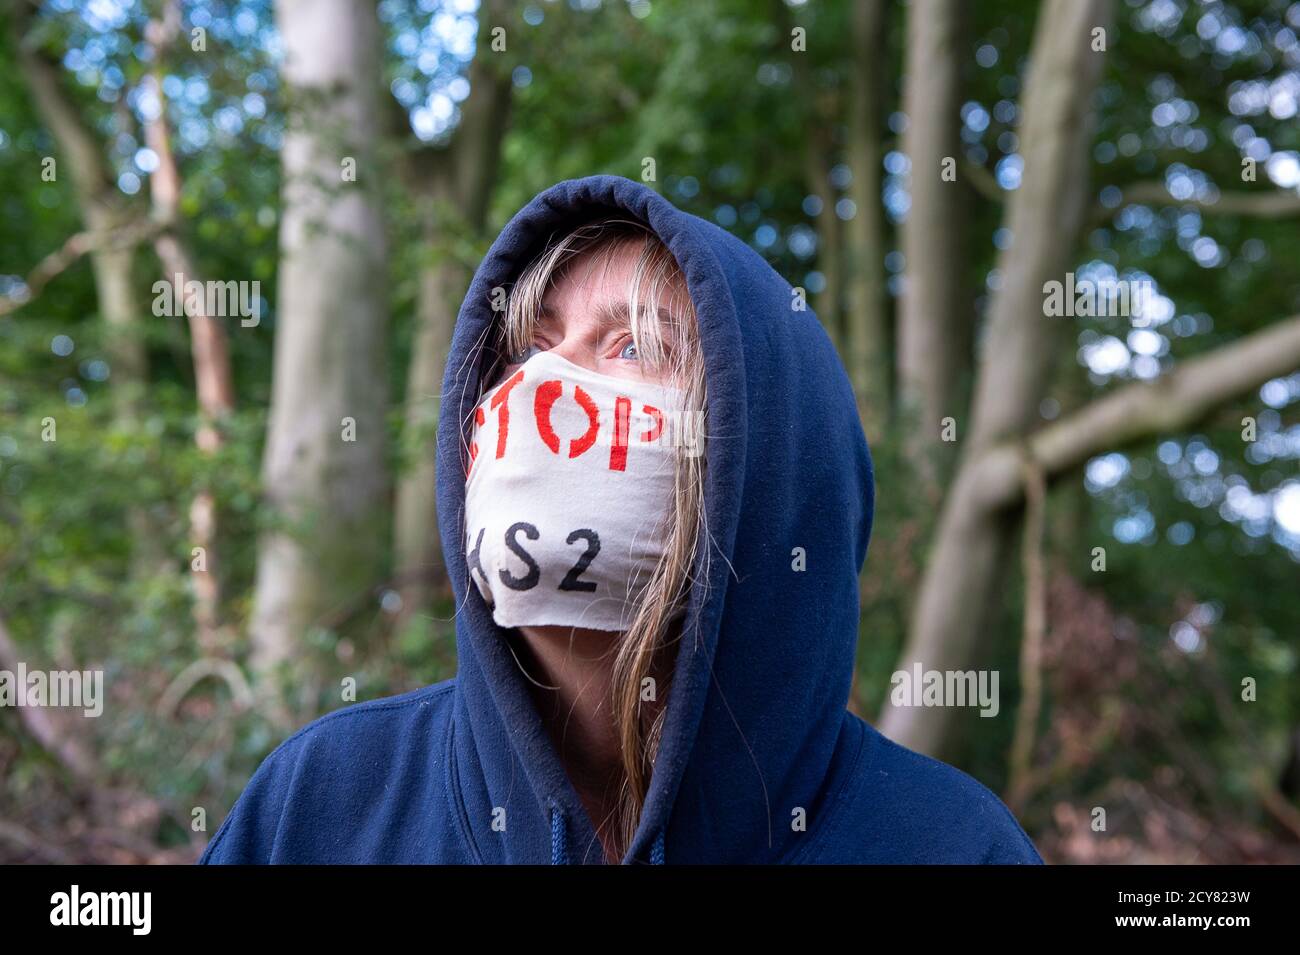 Wendover, UK. 1st October, 2020. A protester wears a Stop HS2 facemask as she watches the tree house evictions. Peaceful tree protectors and environmental campaigners at the Stop HS2 Jones Hill Protection Camp were being evicted today from their homes in the trees by the National Eviction Team Enforcement Agents working on behalf of HS2 Ltd. The over budget and controversial HS2 High Speed Rail link from London to Birmingham project puts 108 ancient woodlands, 693 wildlife sites and 33 SSSIs at risk of damage or destruction. Maureen McLean/Alamy Live News Stock Photo